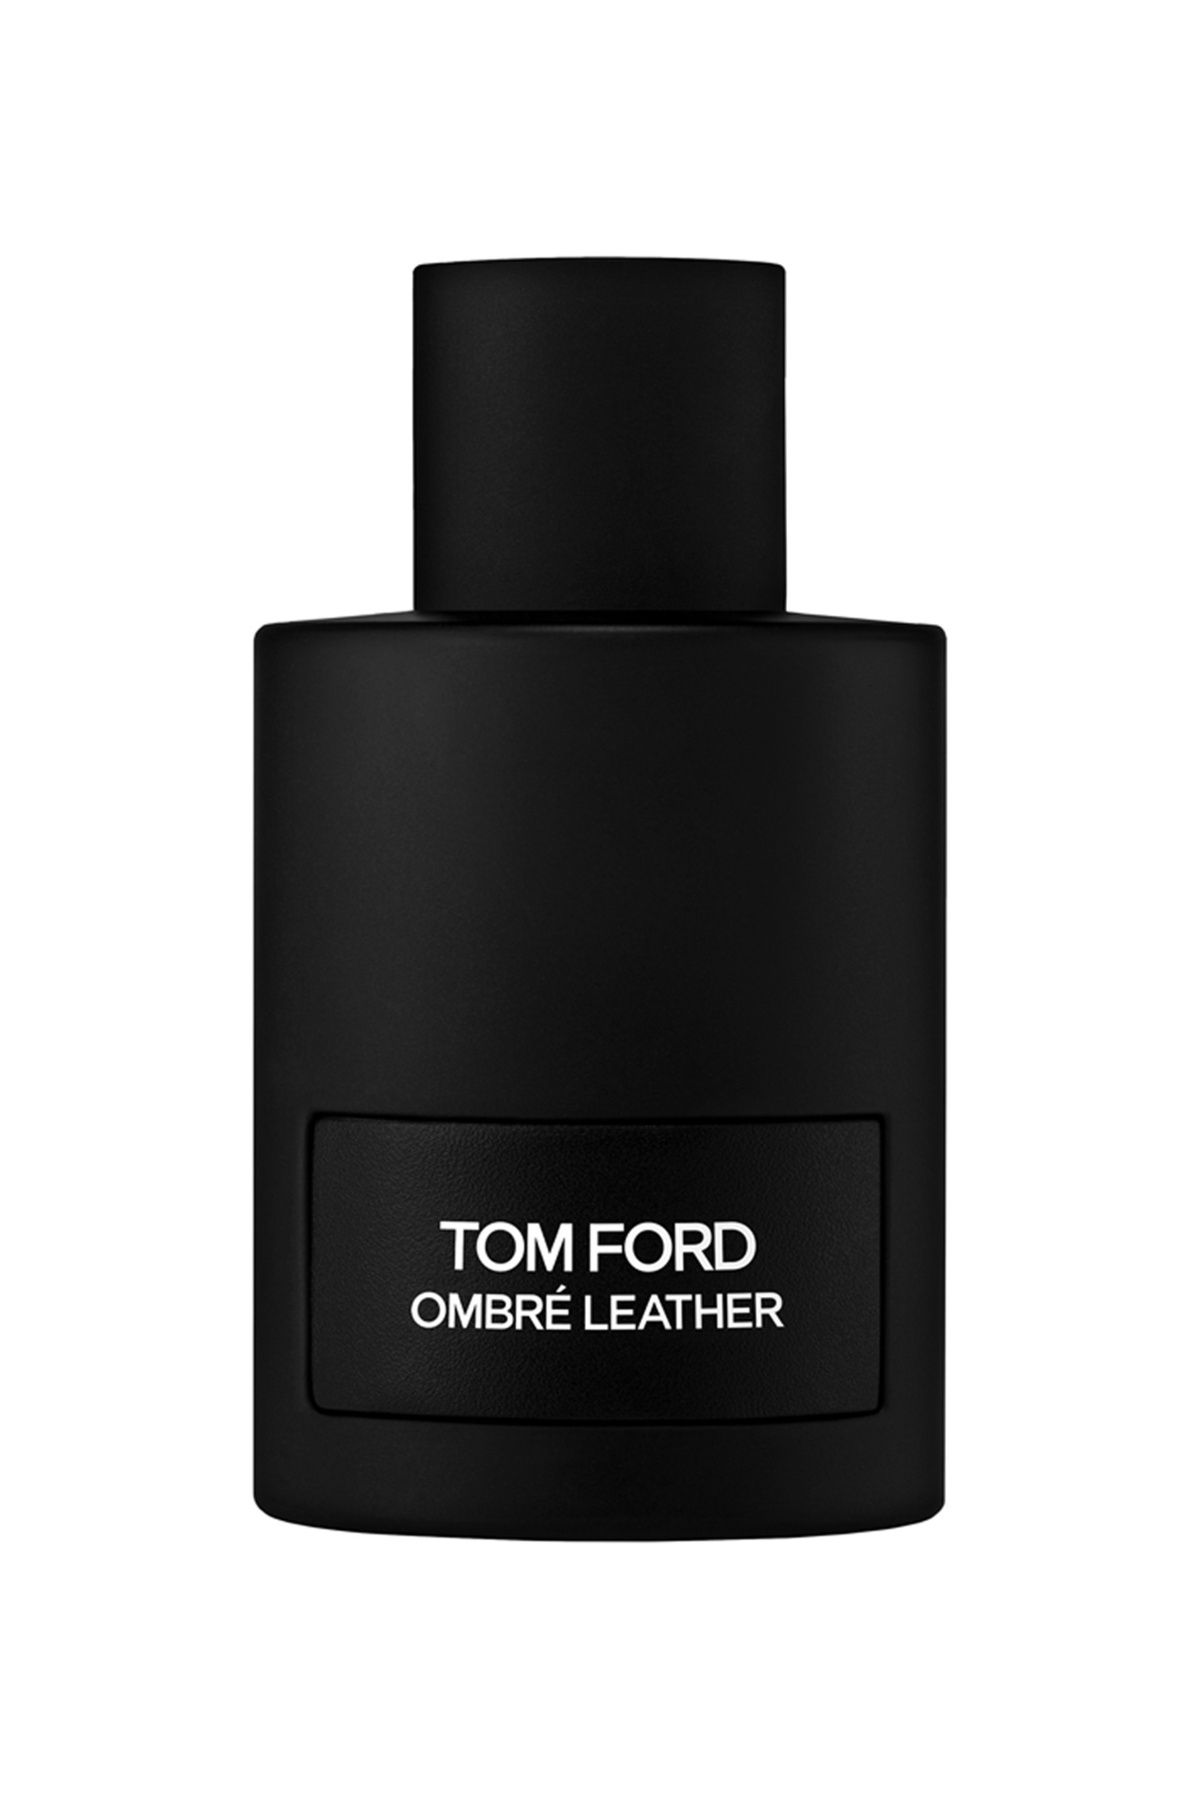 Tom Ford Ombre Leather EDP Parfüm 150 ml